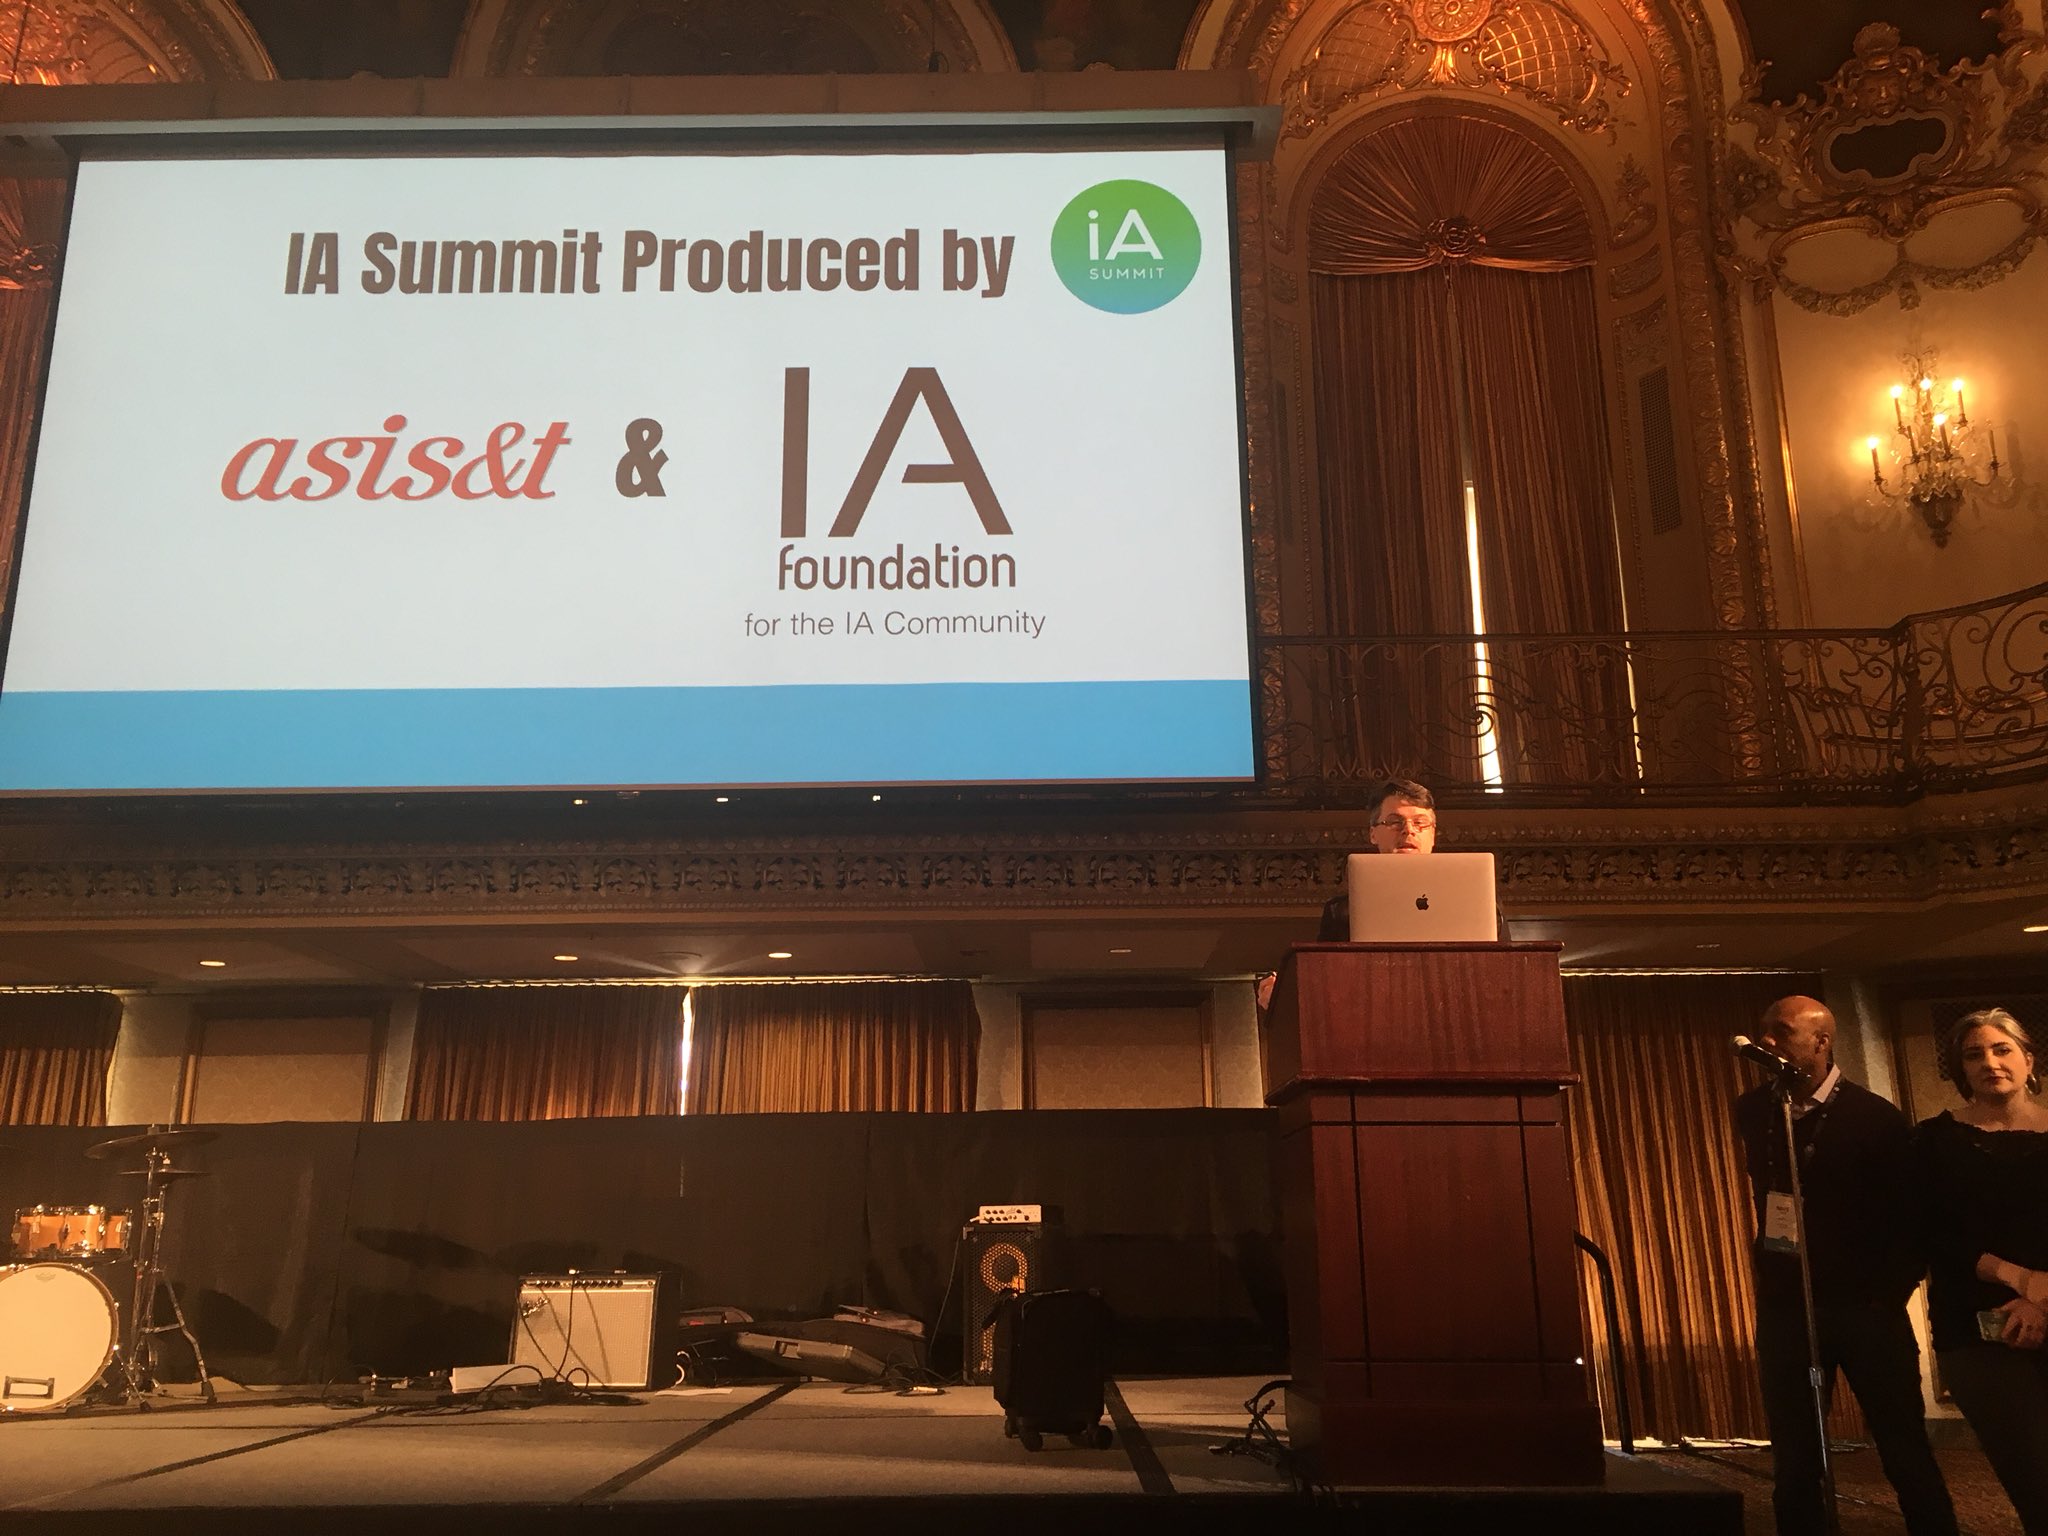 IA Summit co-chair on stage opening the conference.